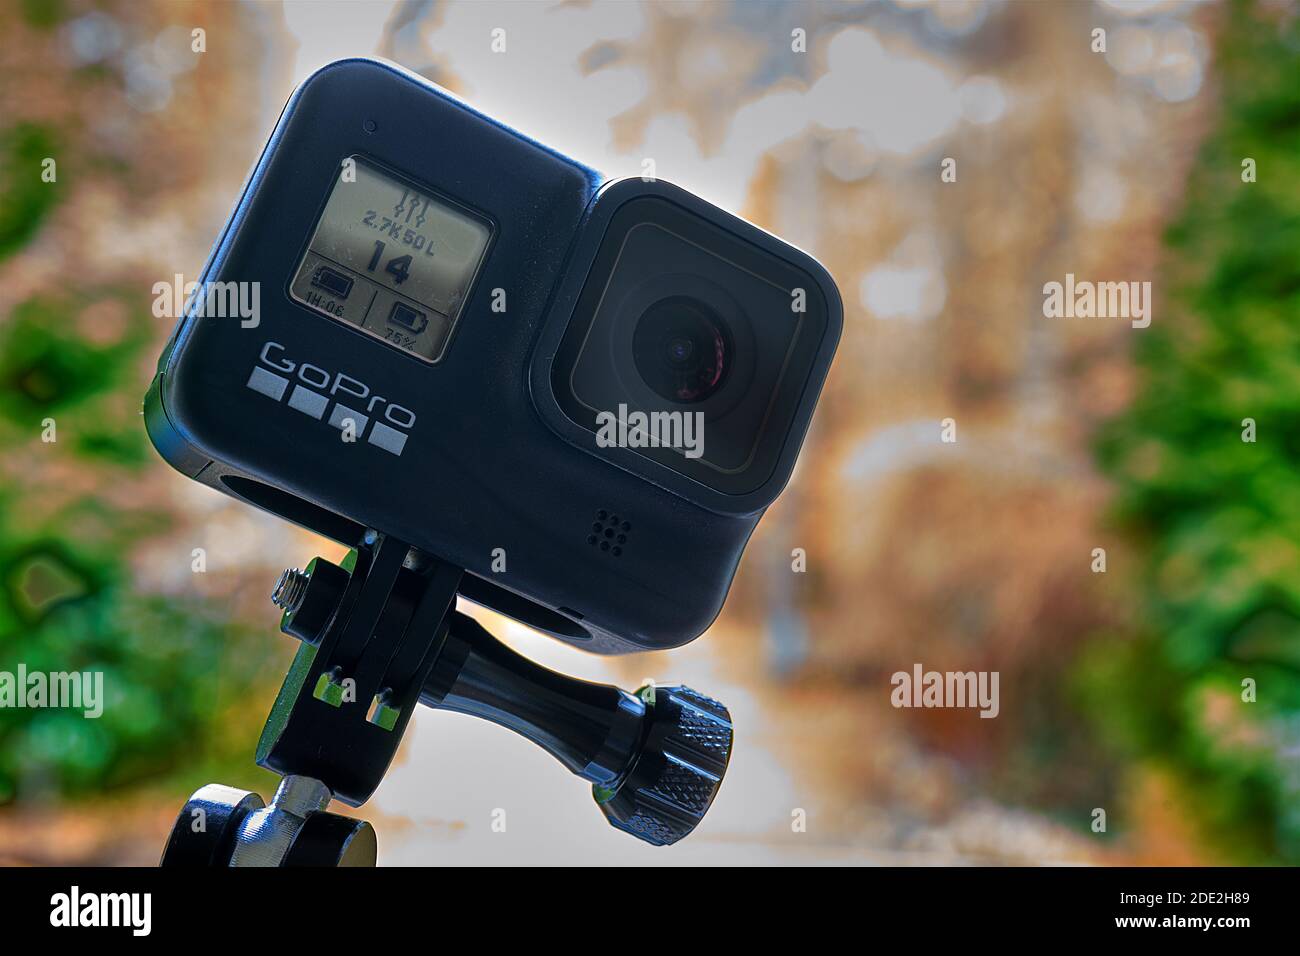 Gopro Hero 8 black action camera, close-up of the front view of the small  actioncam, installed on a ball head in Gifhorn, Germany, November 17th,  2020 Stock Photo - Alamy